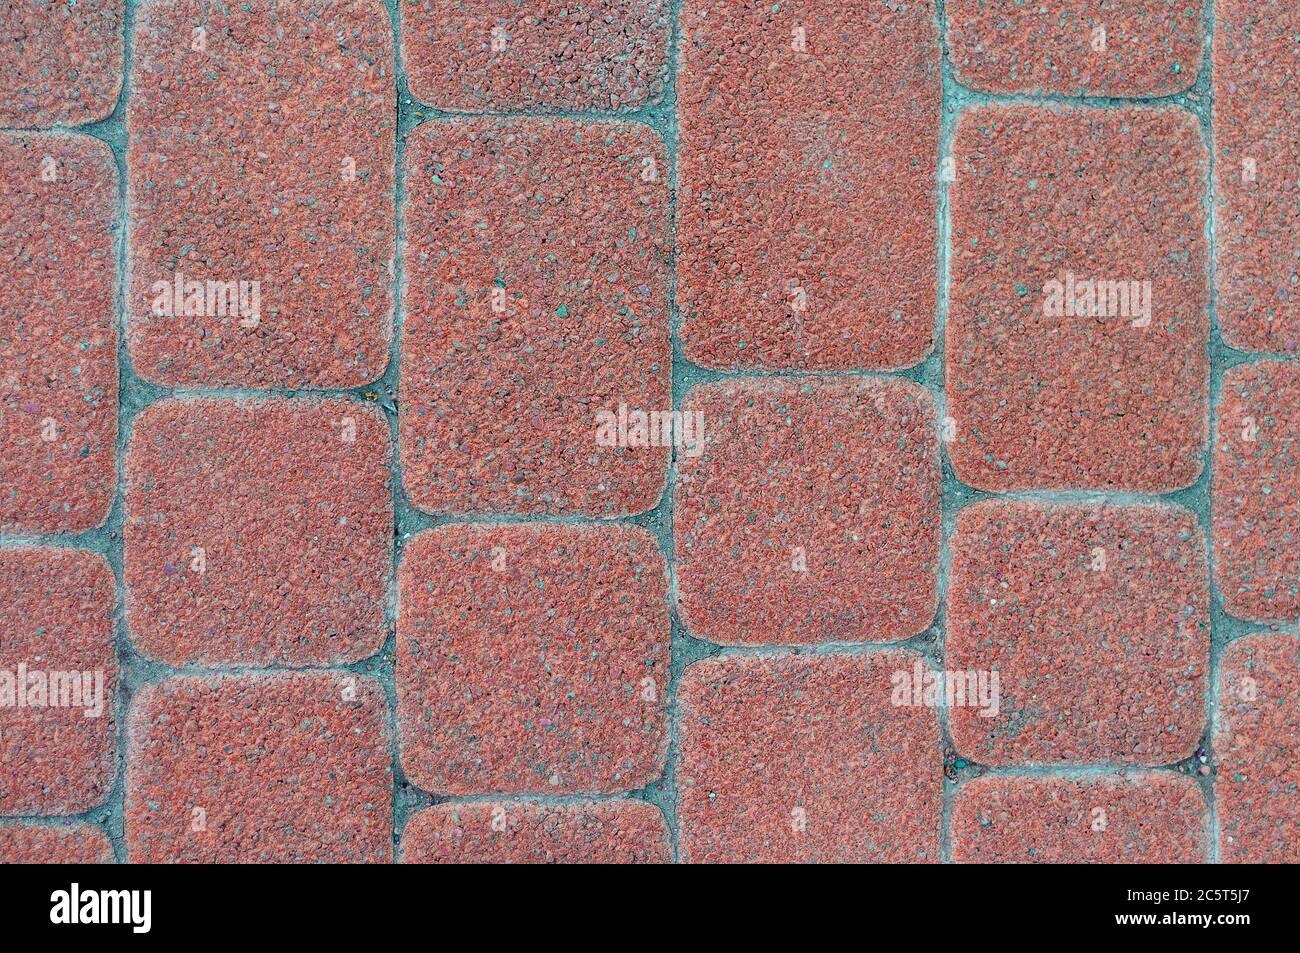 Designer background for interiors made of stone tile. Stone surface texture close-up. Stock Photo